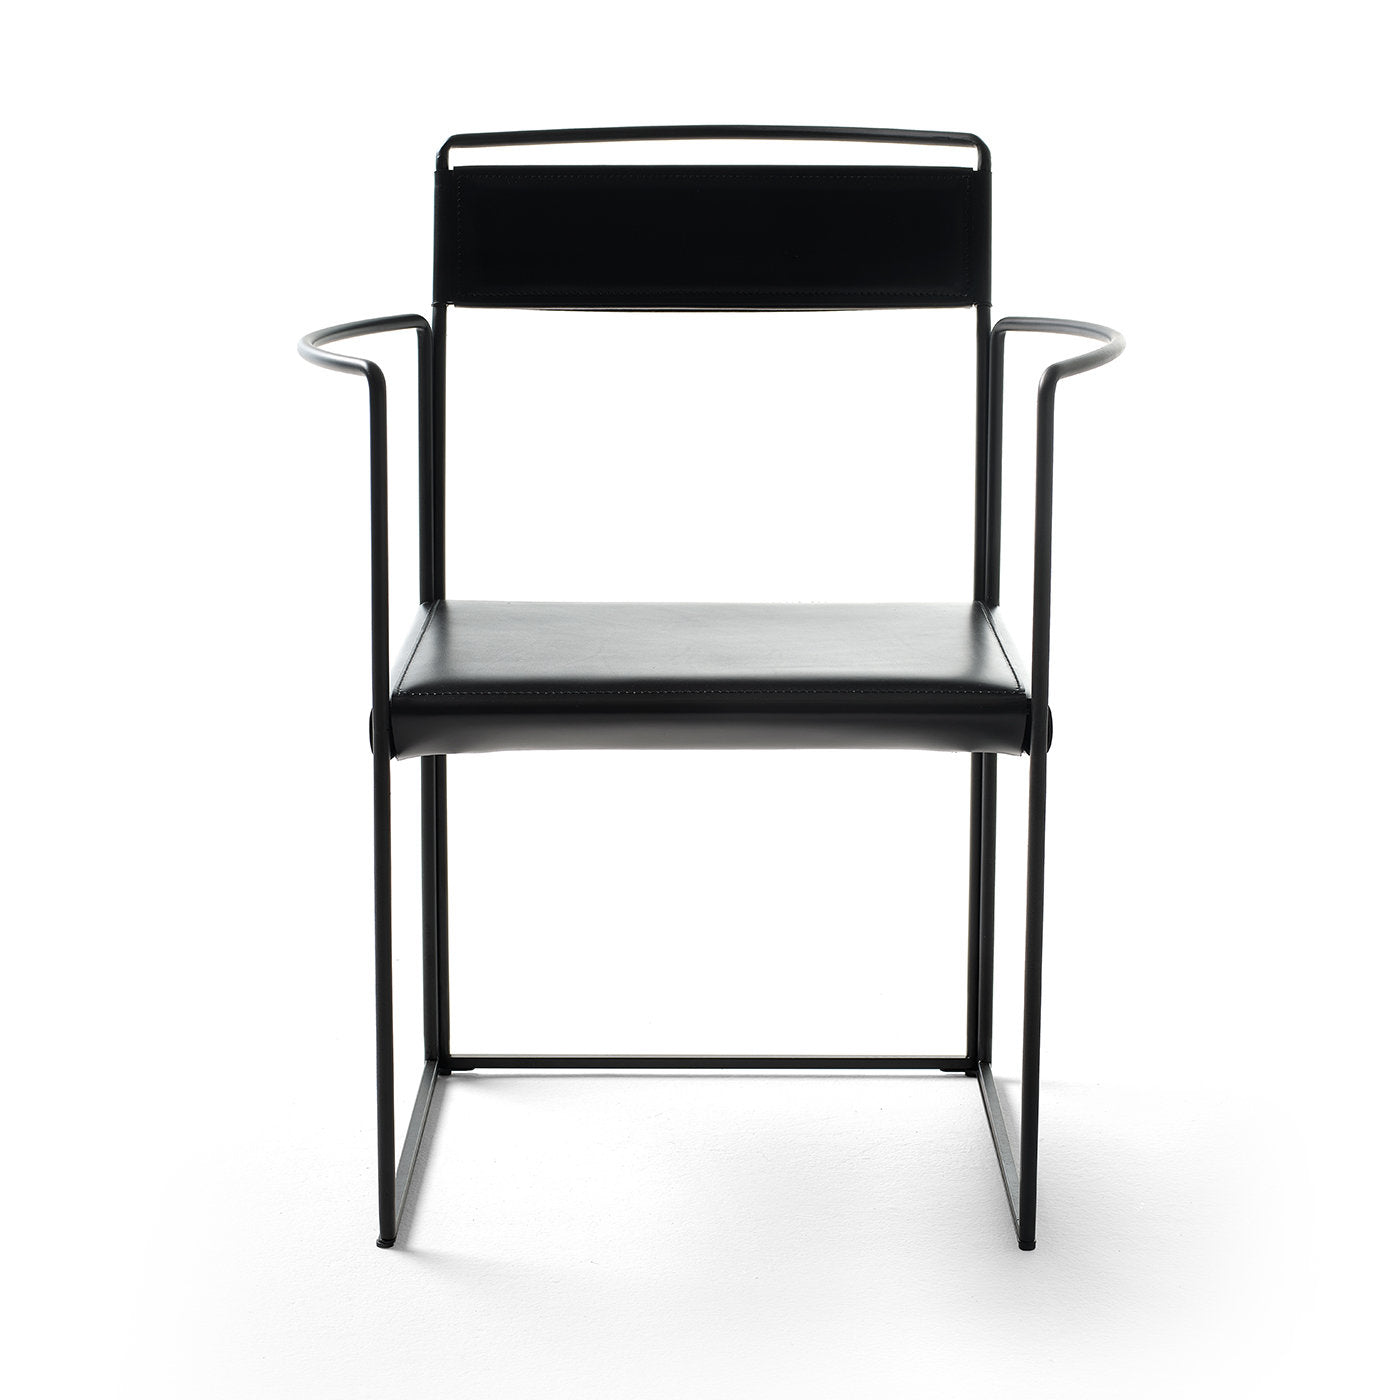 New Outline Black Chair with Armrests by Alberto Colzani - Alternative view 2